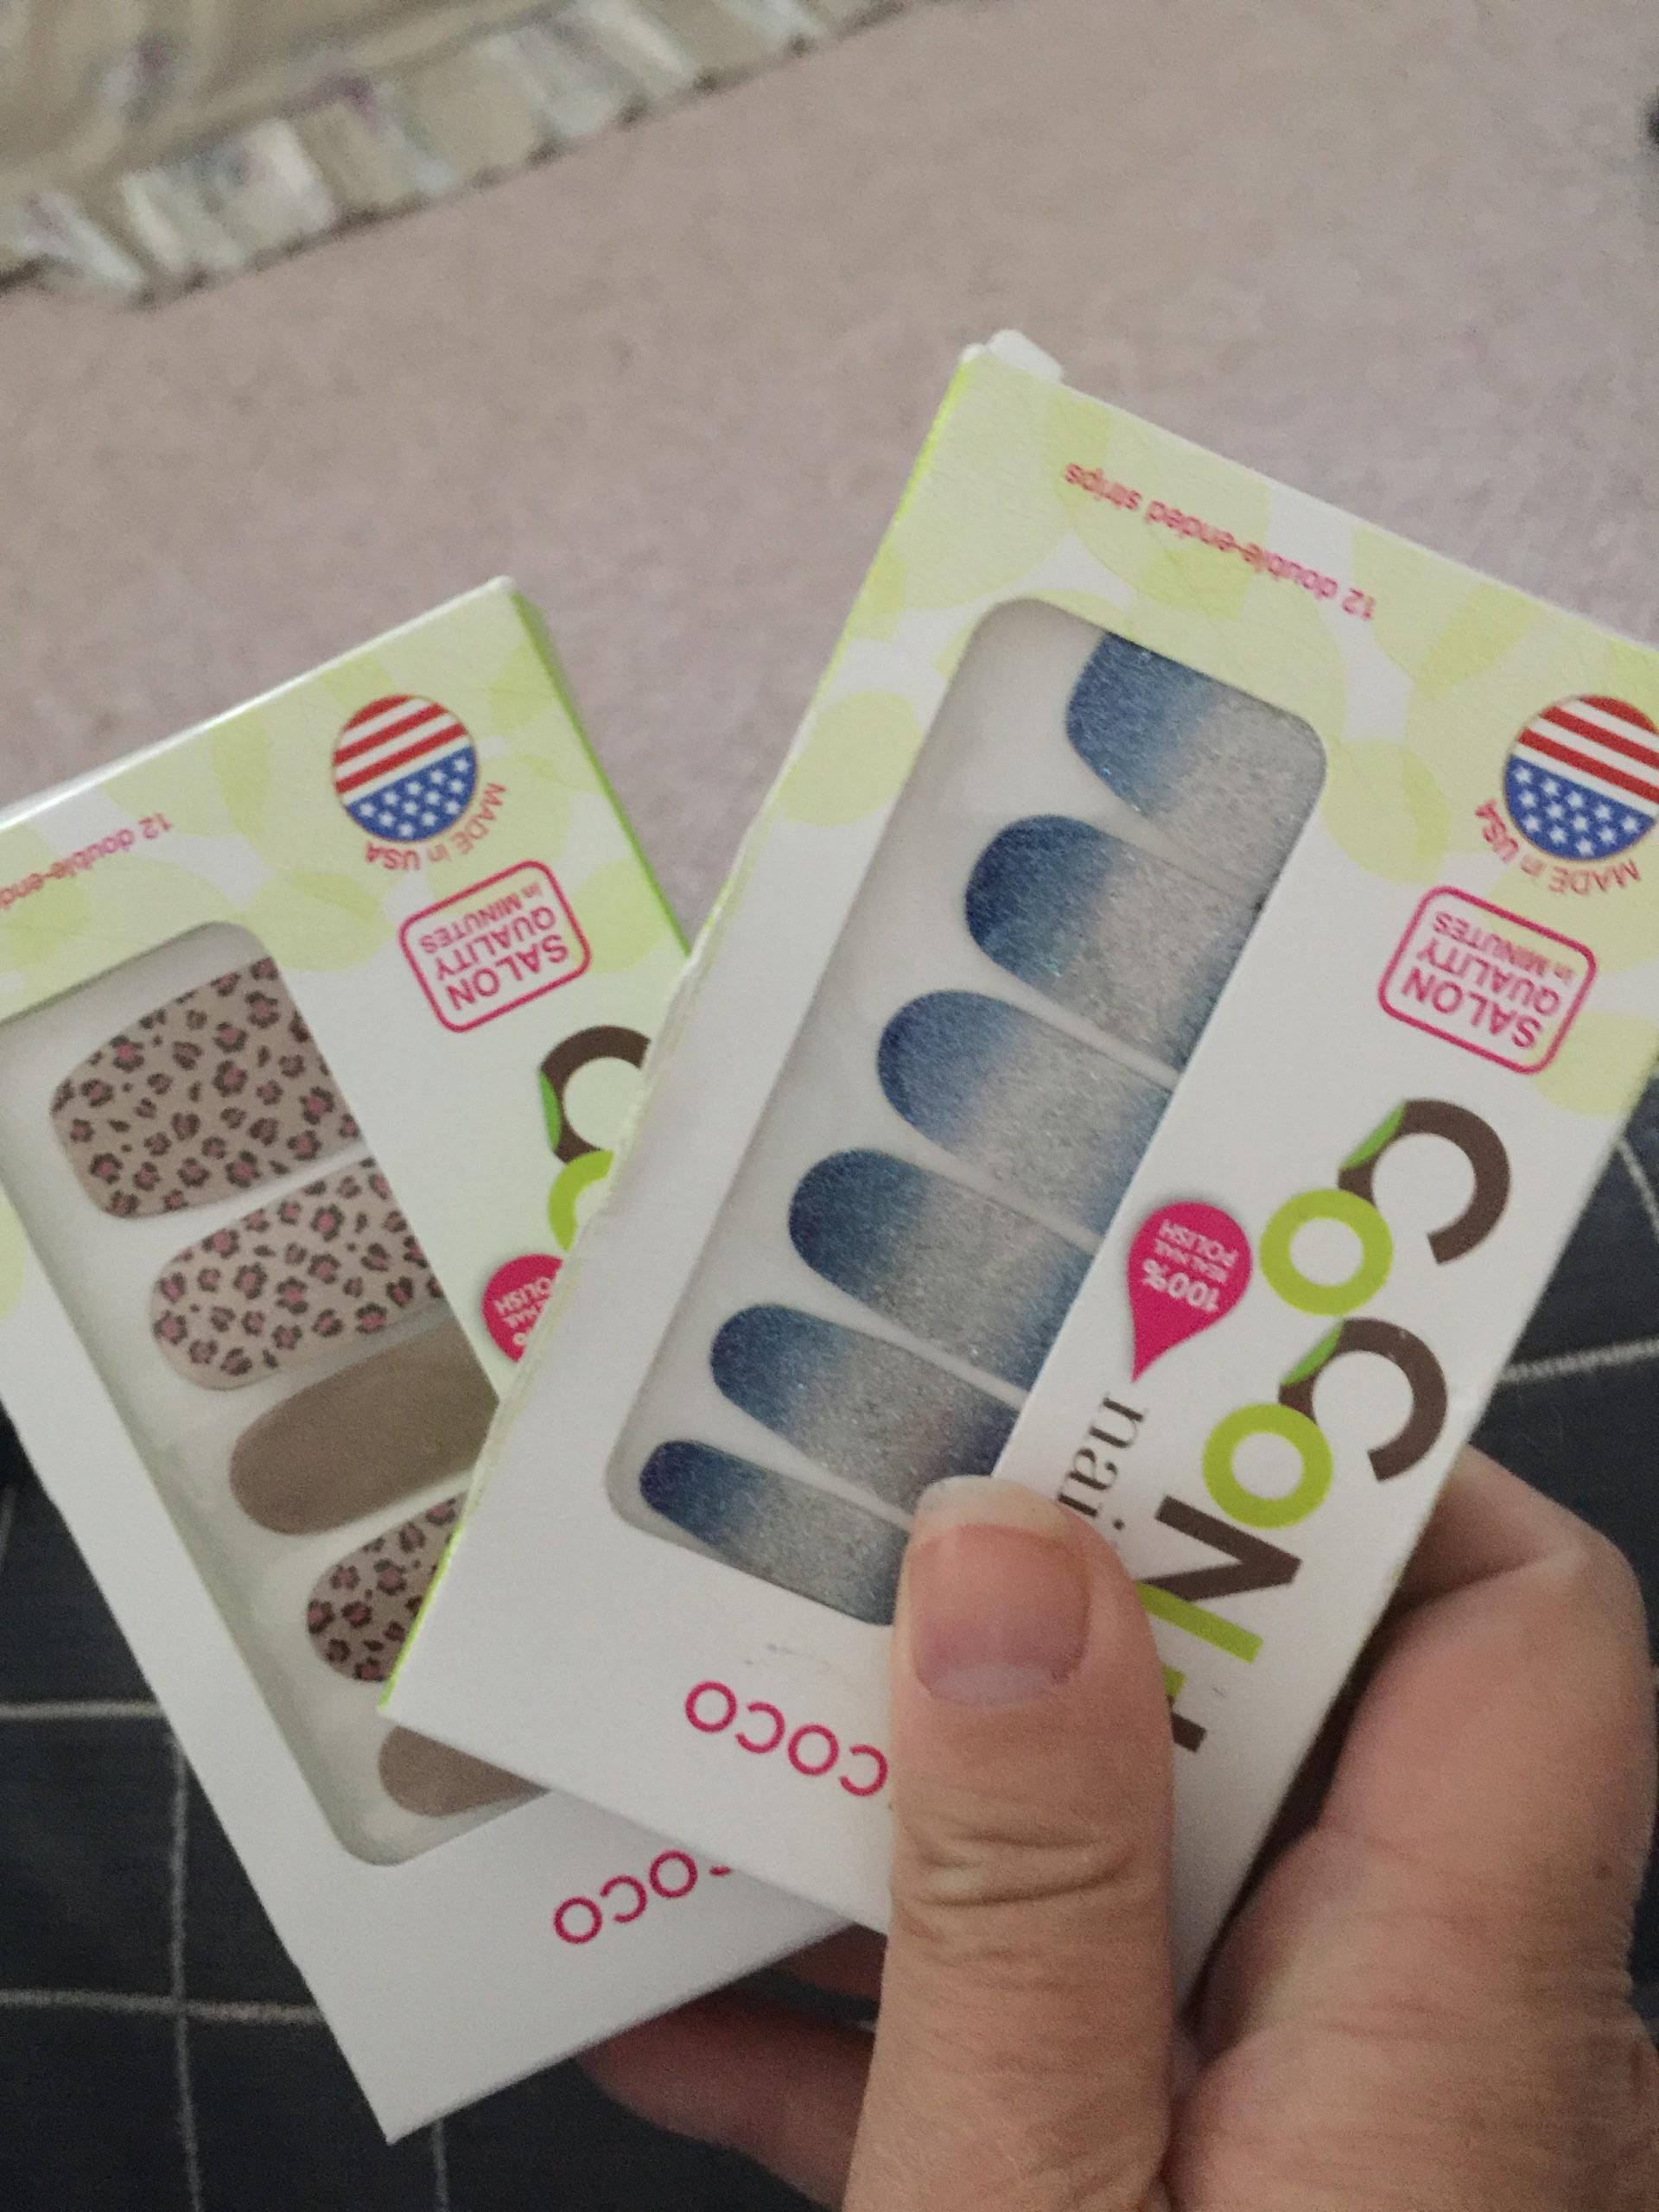 Just an FYI. You can buy nail wraps made by the same ...